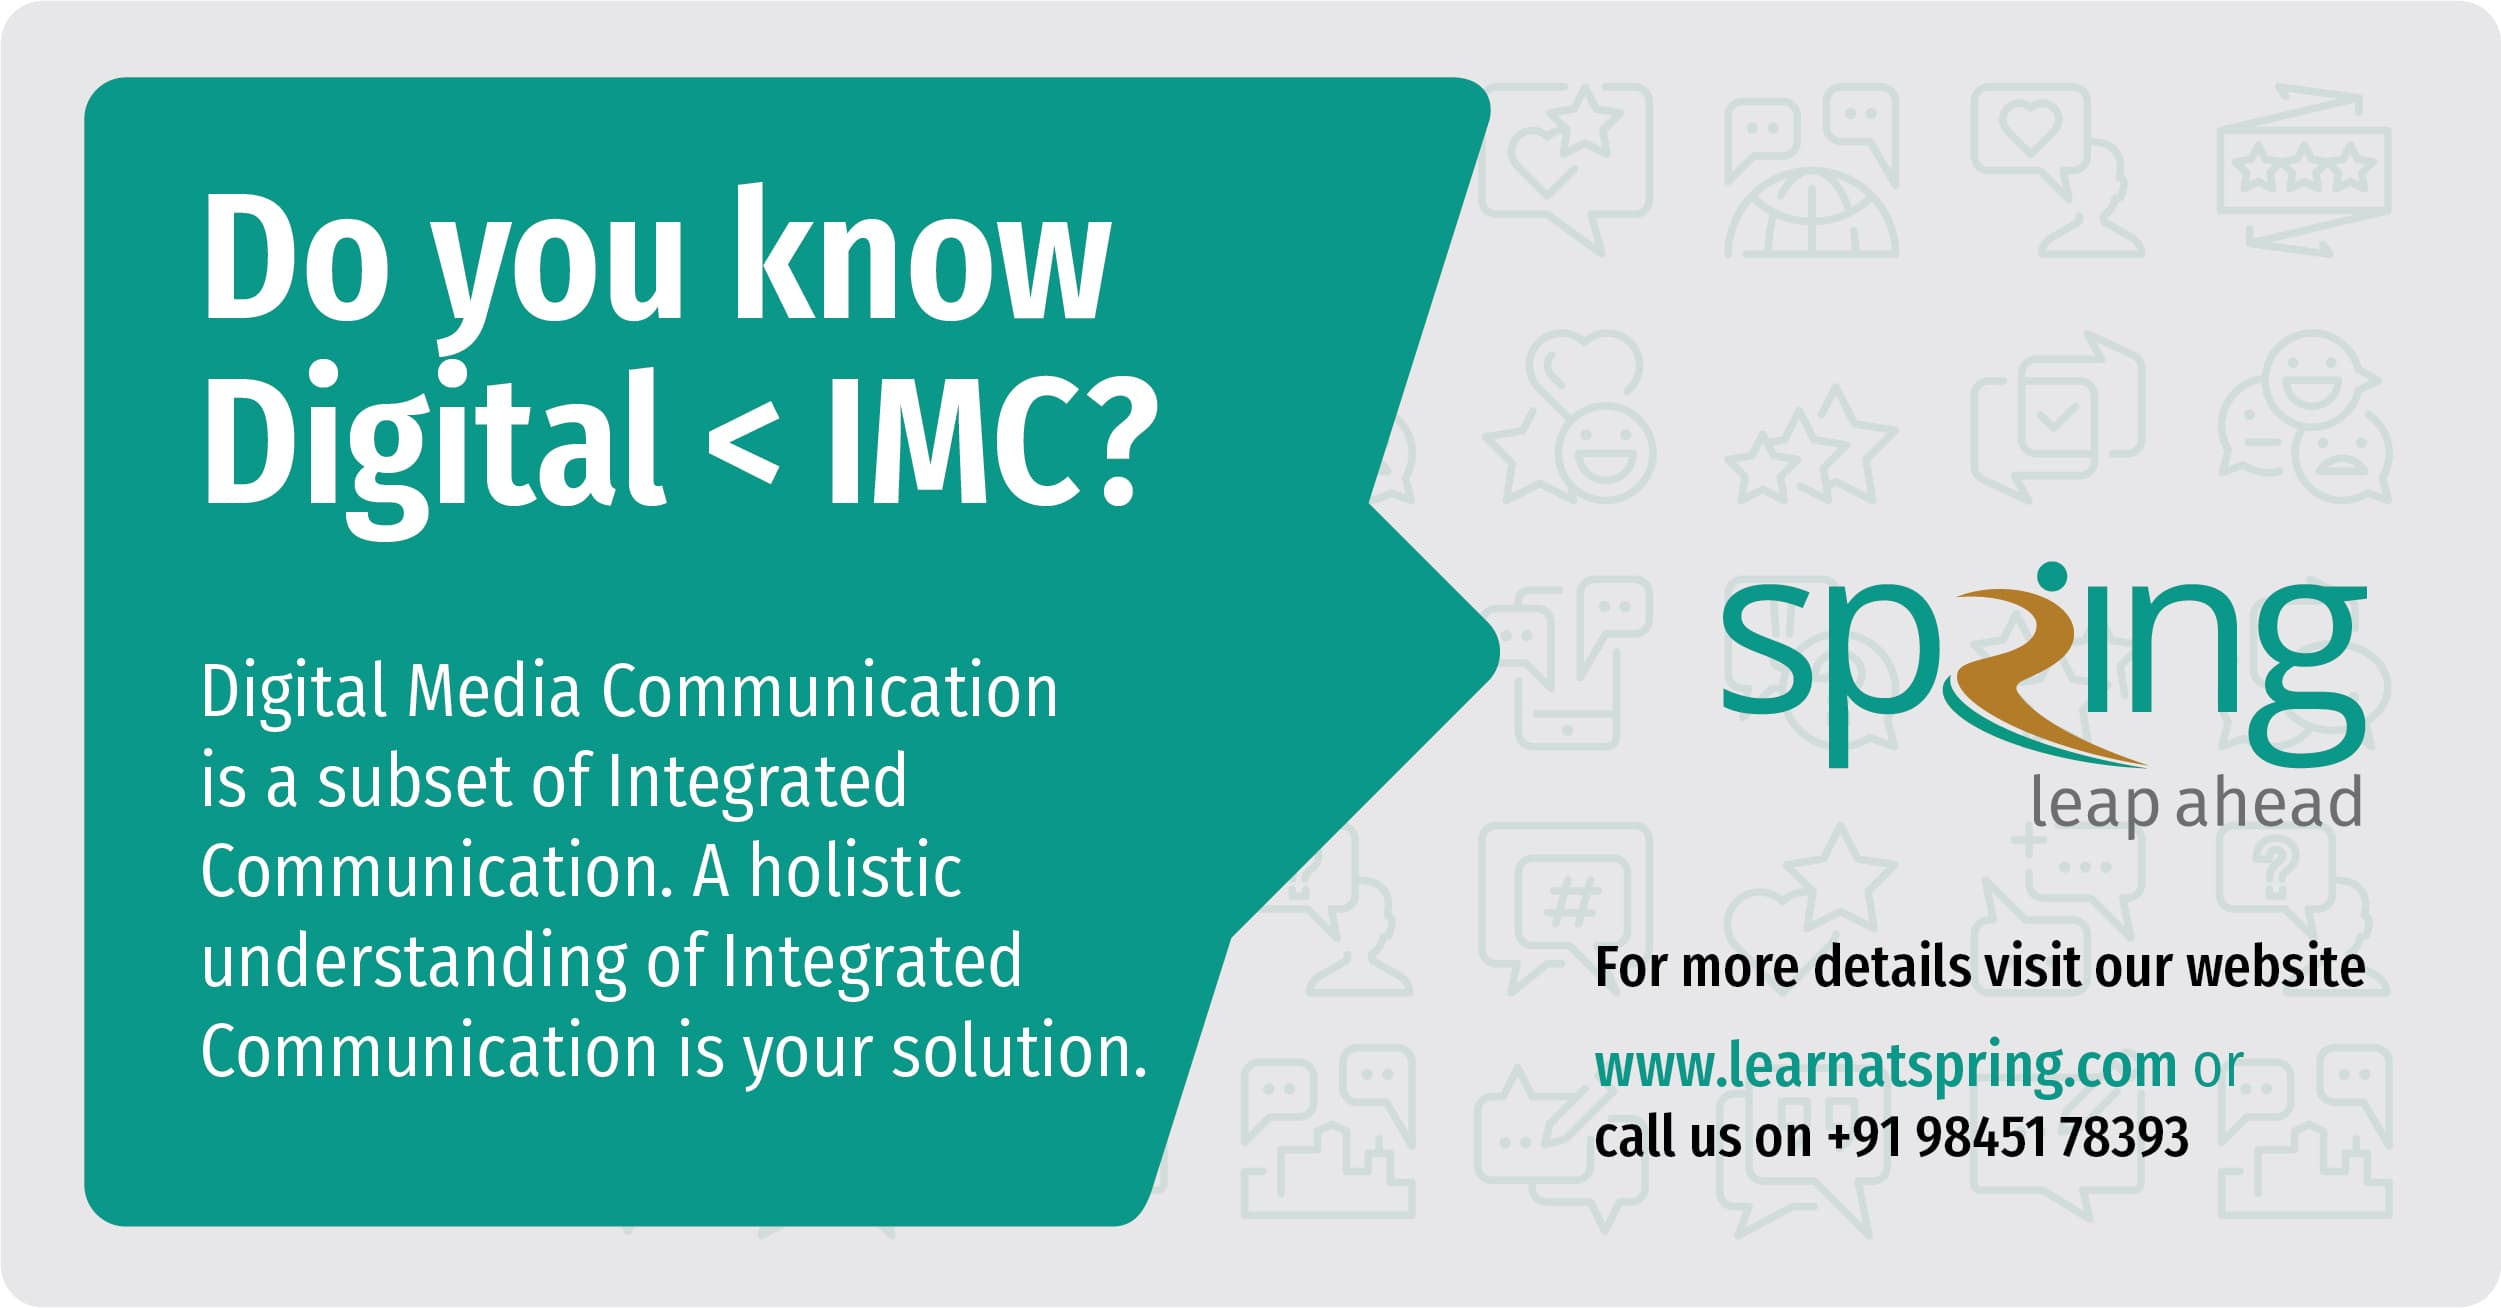 Do You Know Digital Is < IMC?